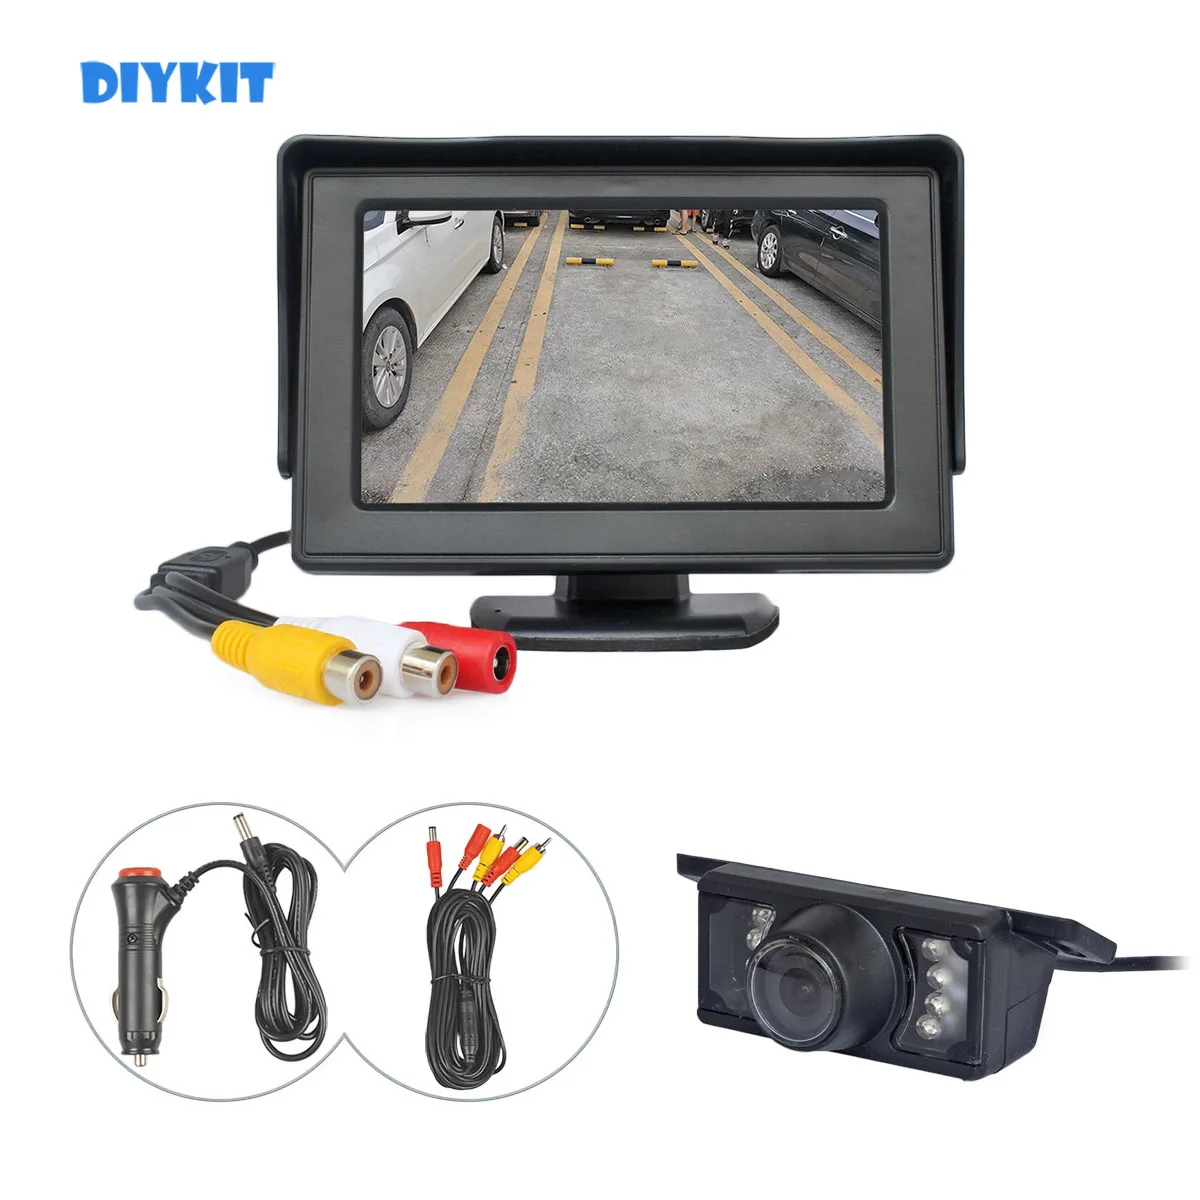 

DIYKIT Wired 4.3 Inch Color TFT LCD Car Monitor + HD IR Night Vision HD Rear View Car Camera Parking Assistance System Kit